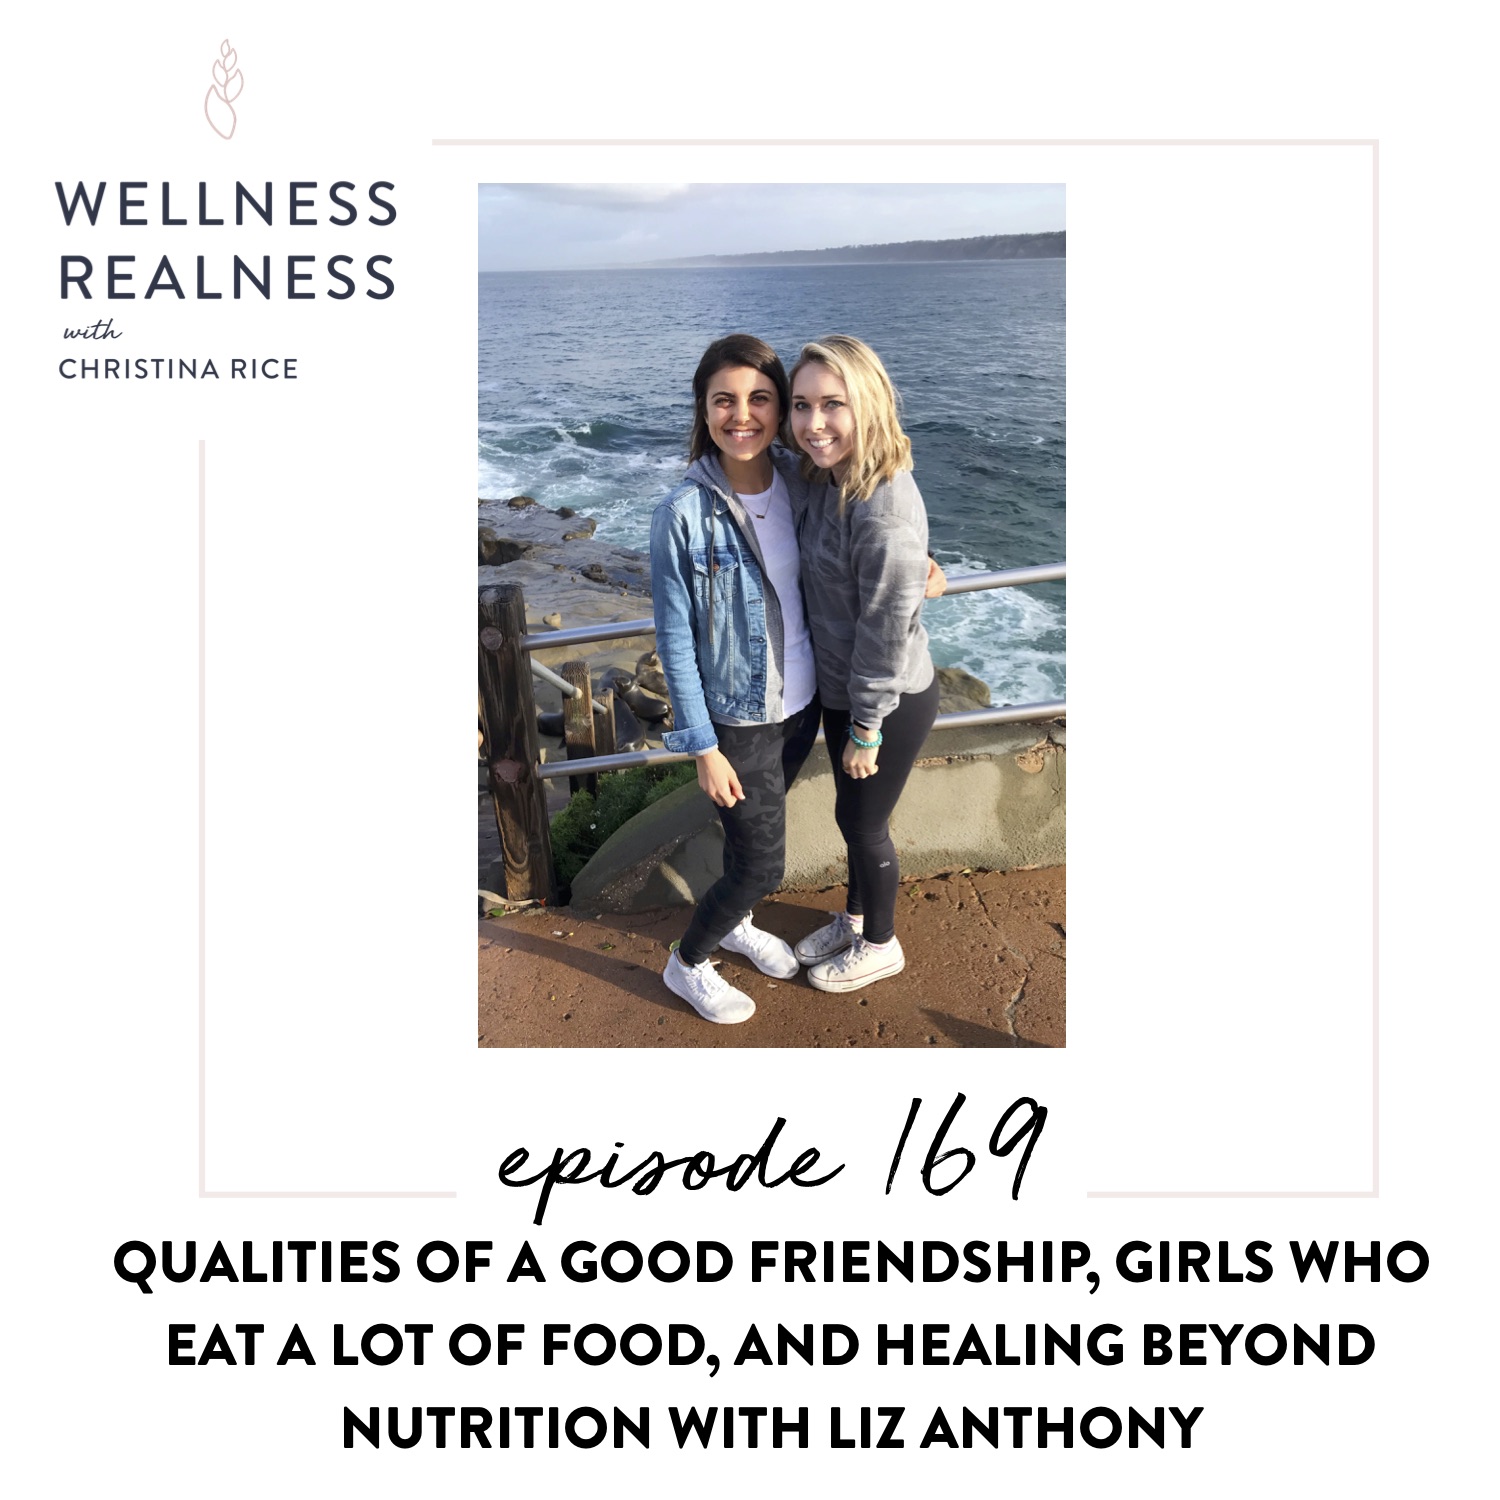 169: Qualities of a Good Friendship, Girls Who Eat a Lot of Food, and Healing Beyond Nutrition with Liz Anthony